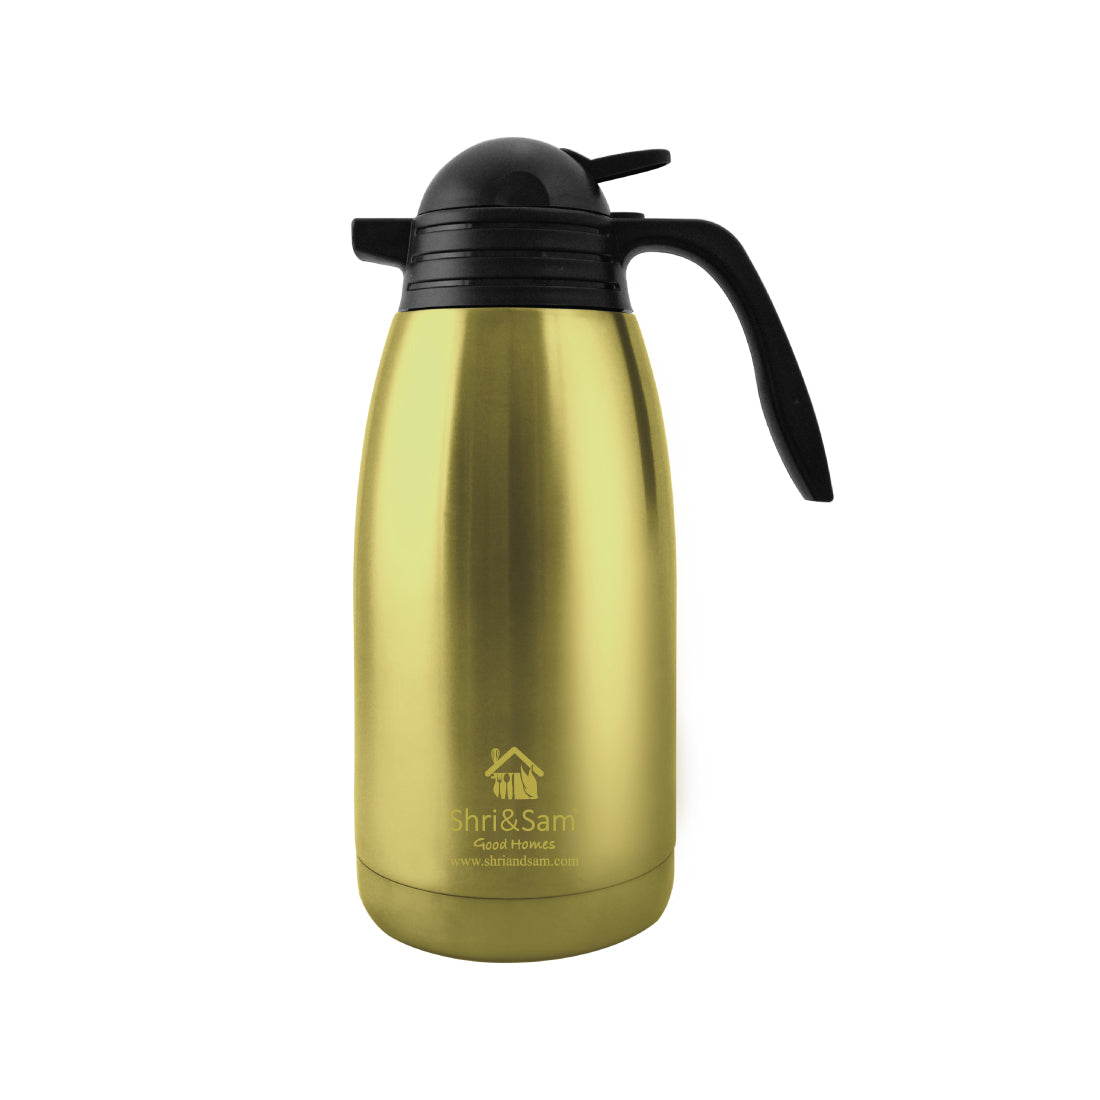 Stainless Steel Triply Vacuum Insulated Jug with Gold PVD Coating Flagon